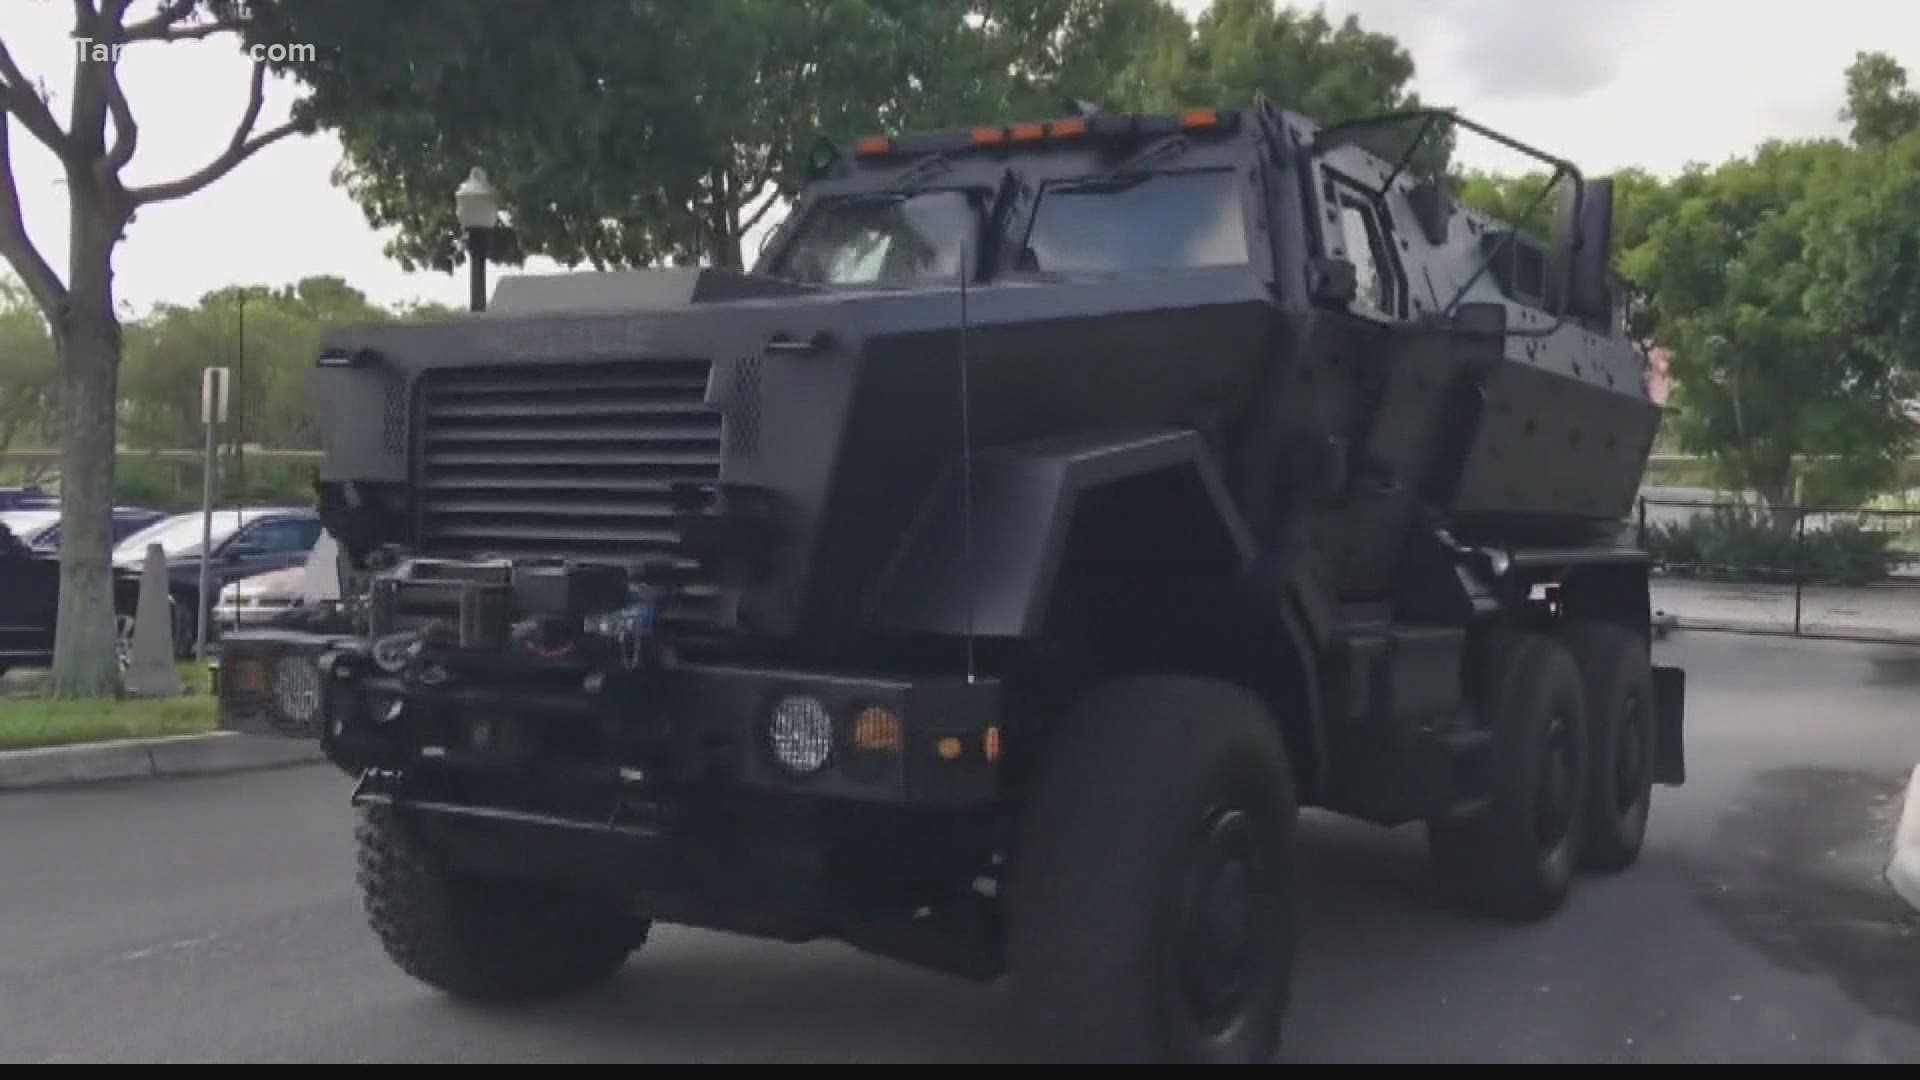 10 Investigates discovered nearly $14 million in used military equipment has been donated to Tampa Bay area agencies.